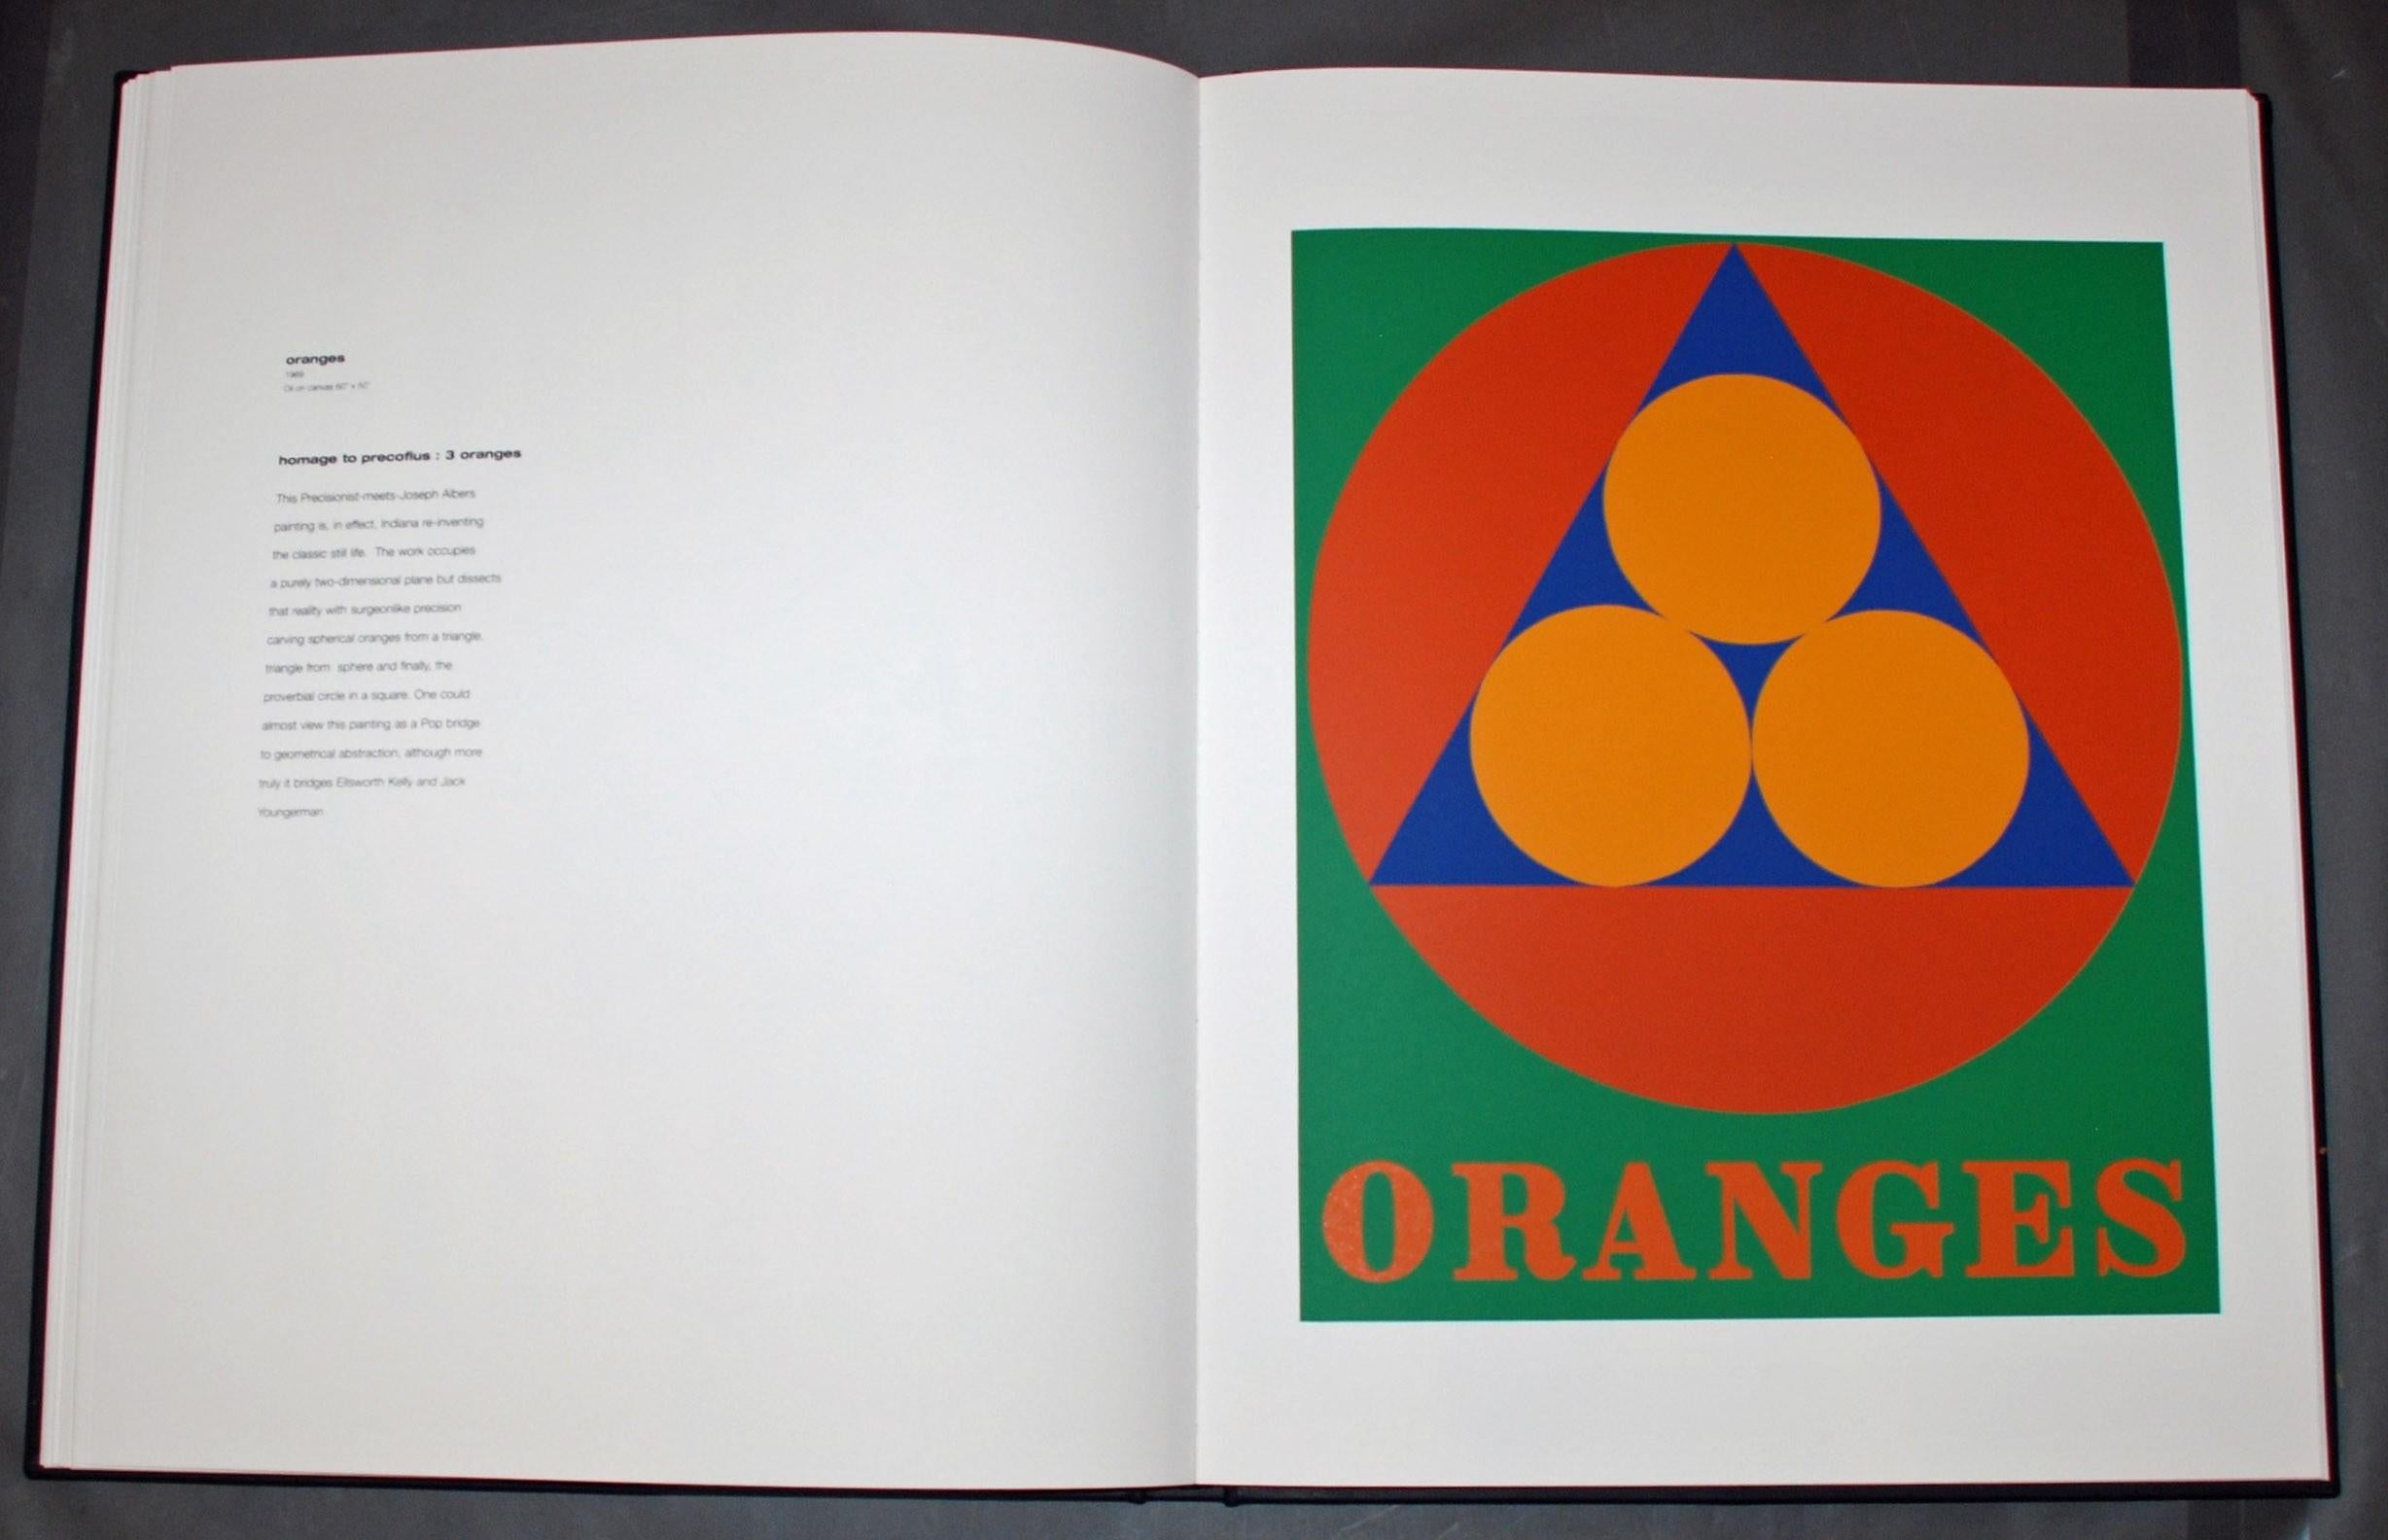 Oranges, from The American Dream - Abstract Print by Robert Indiana